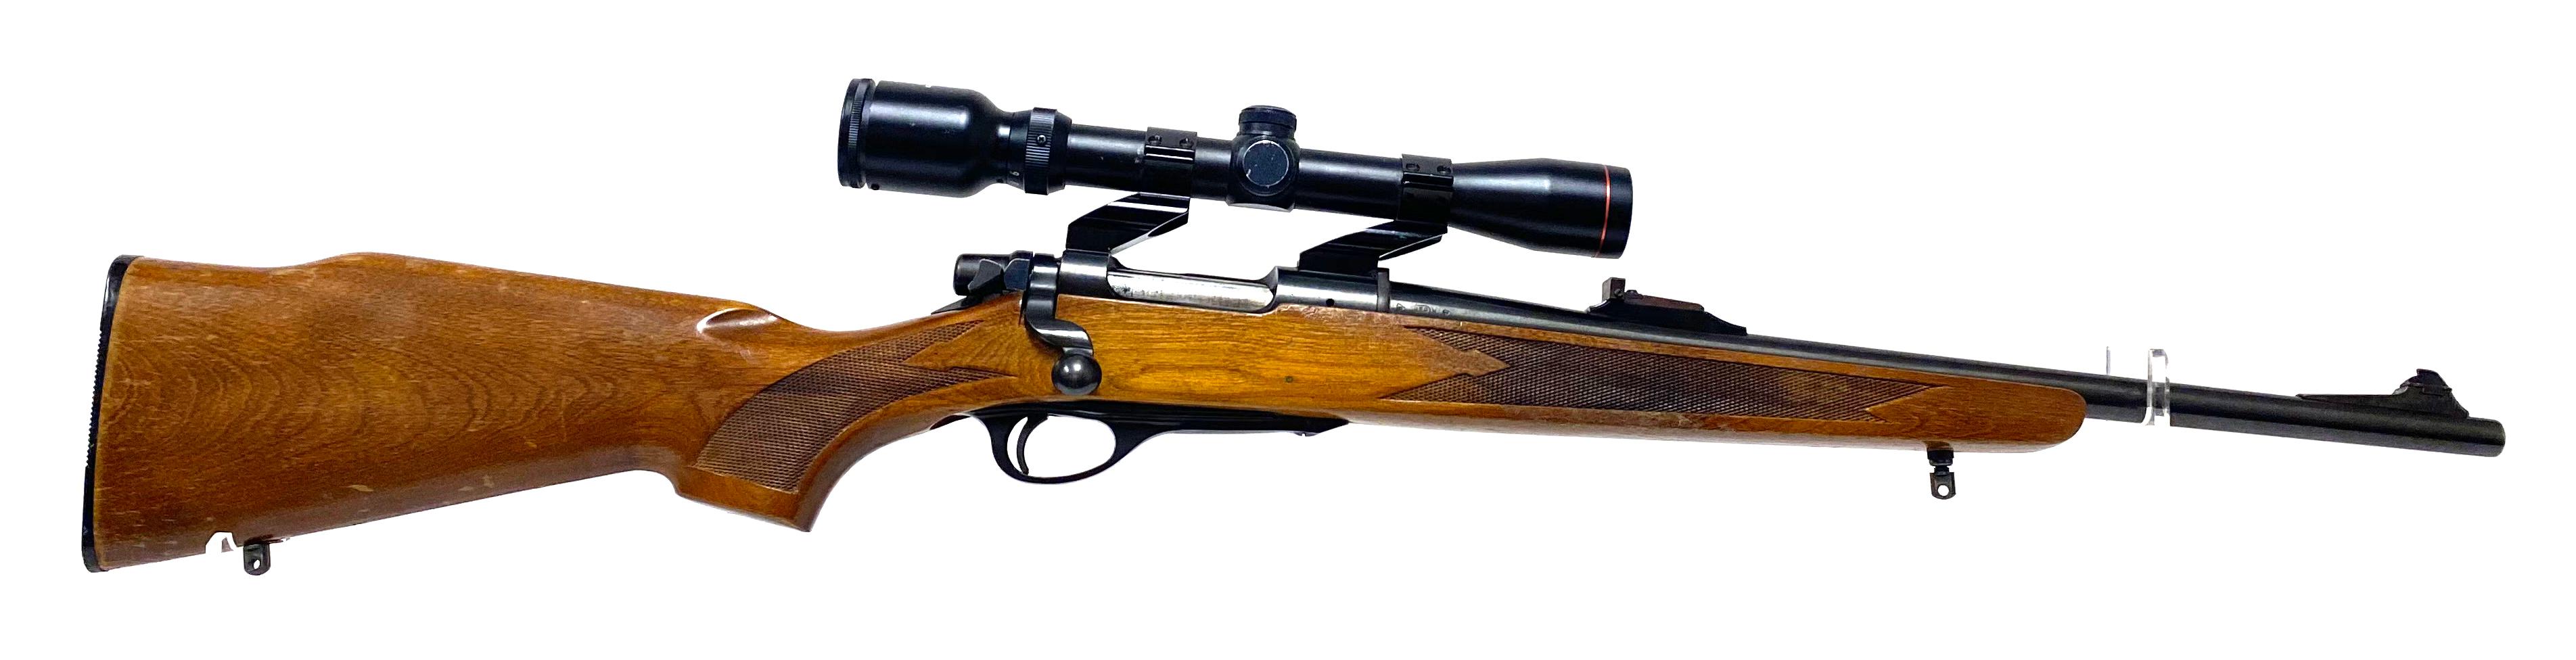 Remington Mohawk-600 .243 WIN. Bolt Action Rifle with Scope